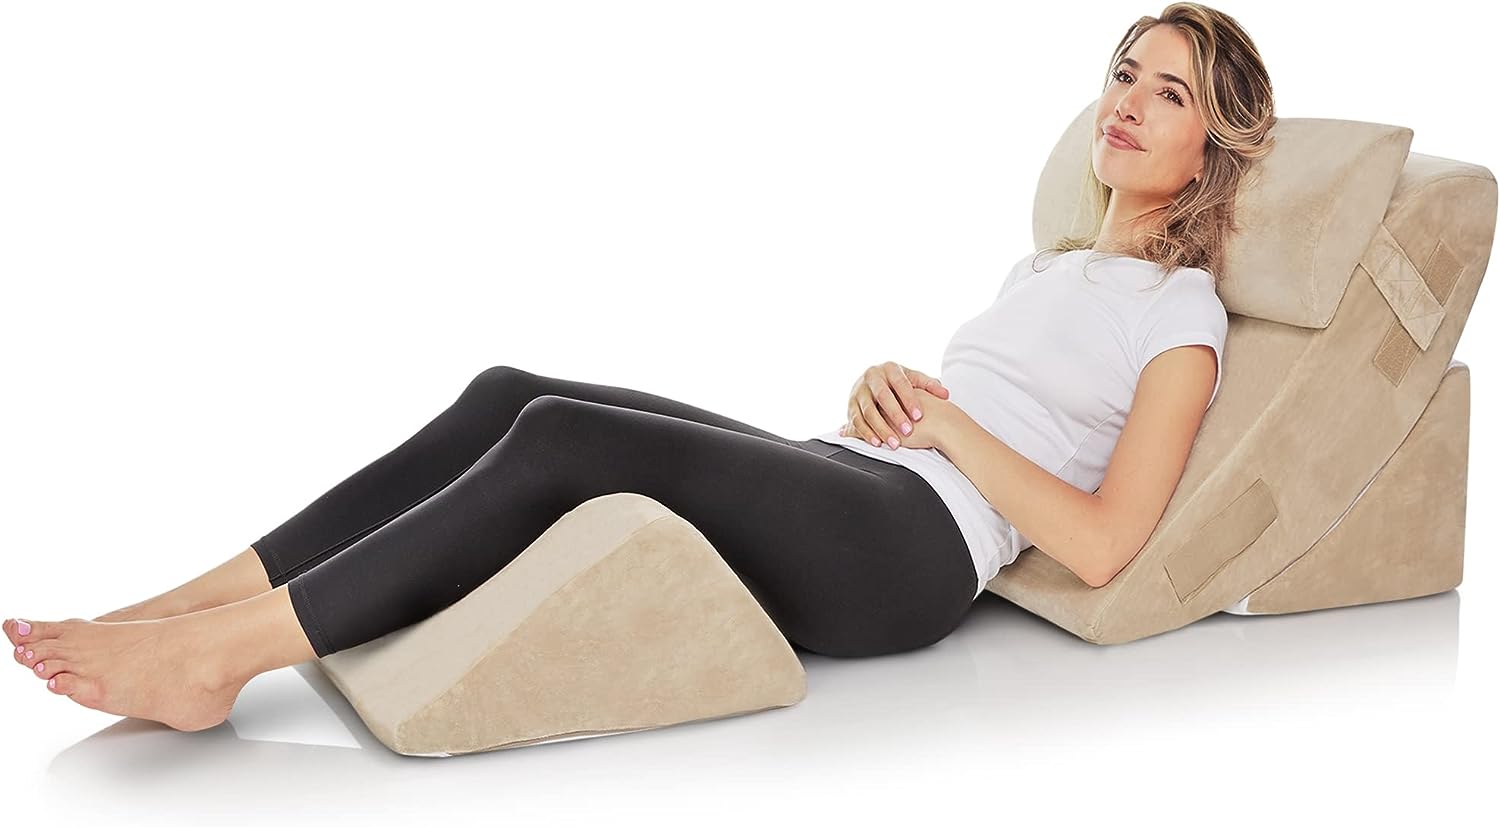 4 Pc Bed Wedge Pillows Set - Orthopedic Wedge Pillow [...]